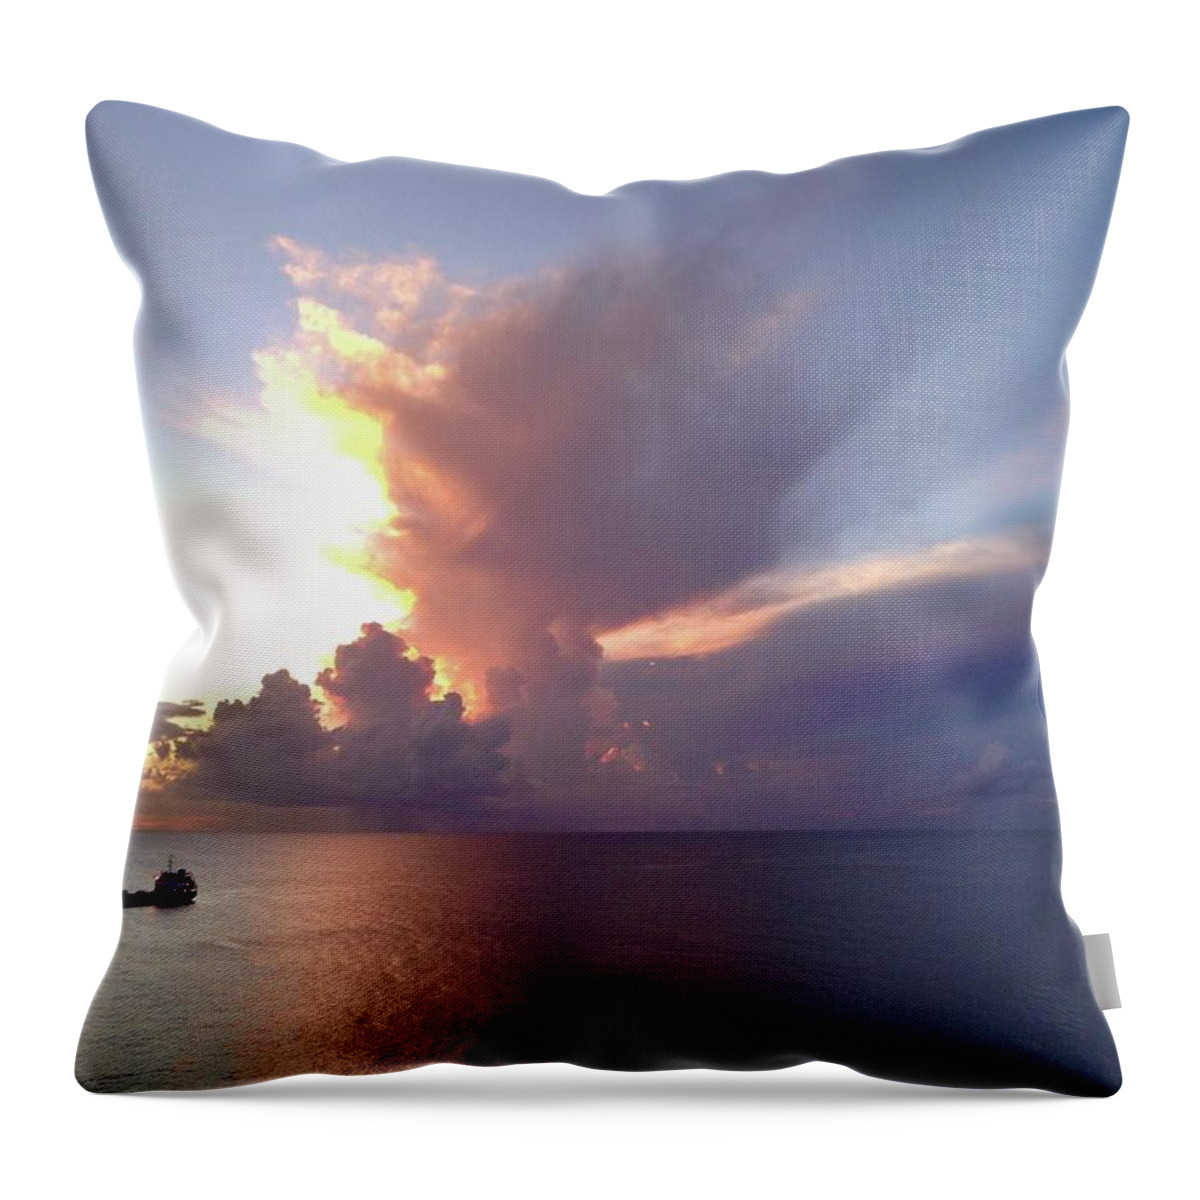  Throw Pillow featuring the photograph Caribbean Sea Phenomenon 2 by Judy Frisk